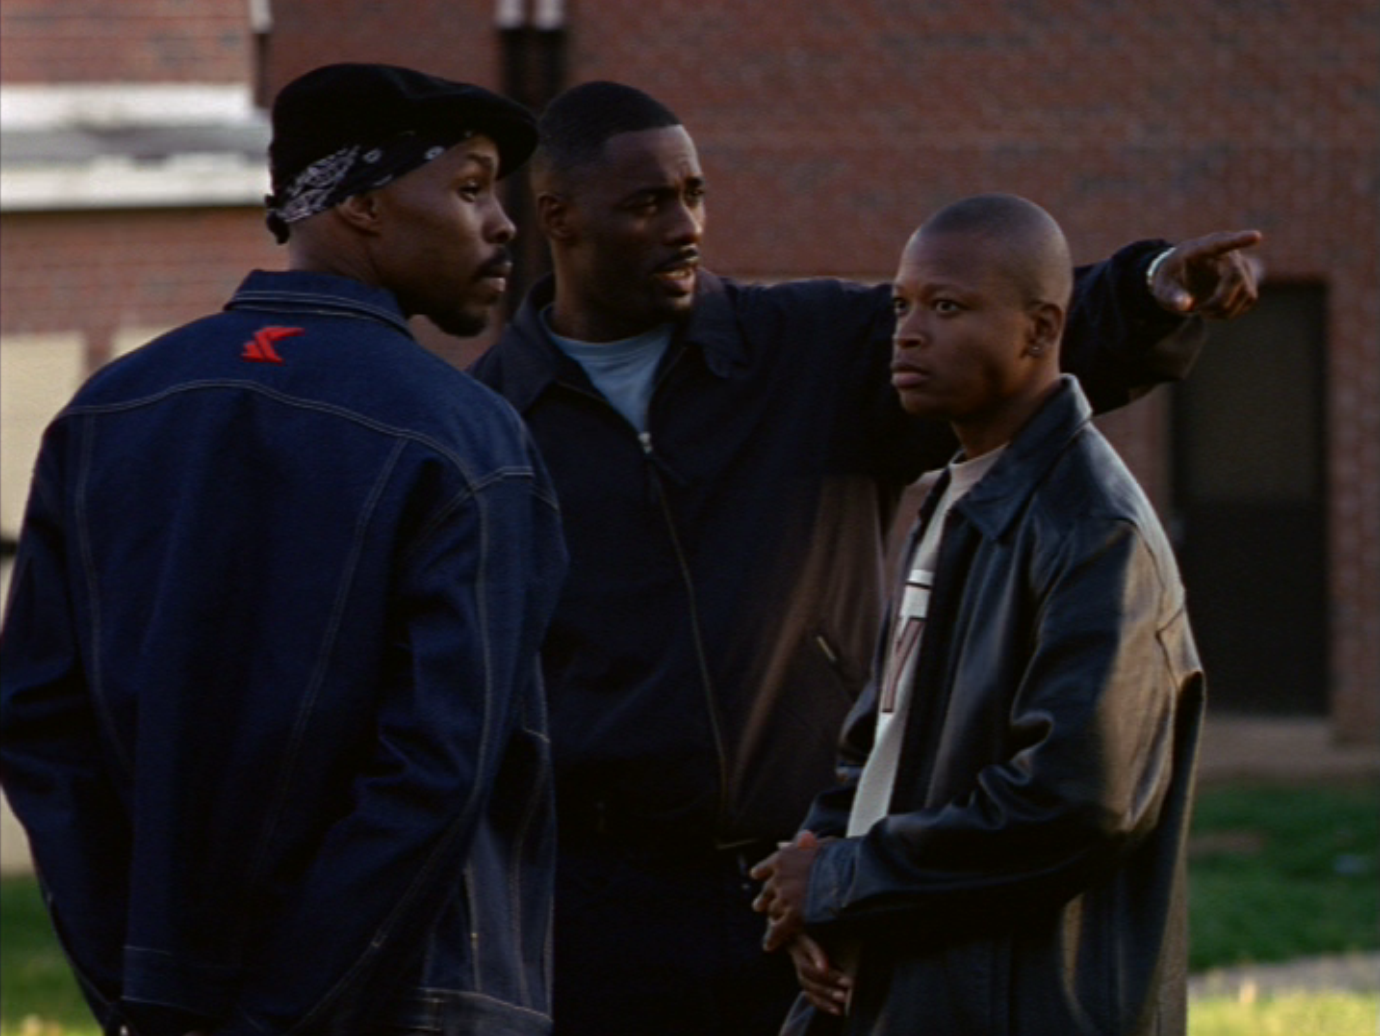 Lost in the Movies: The Wire - The Wire (season 1, episode 6)